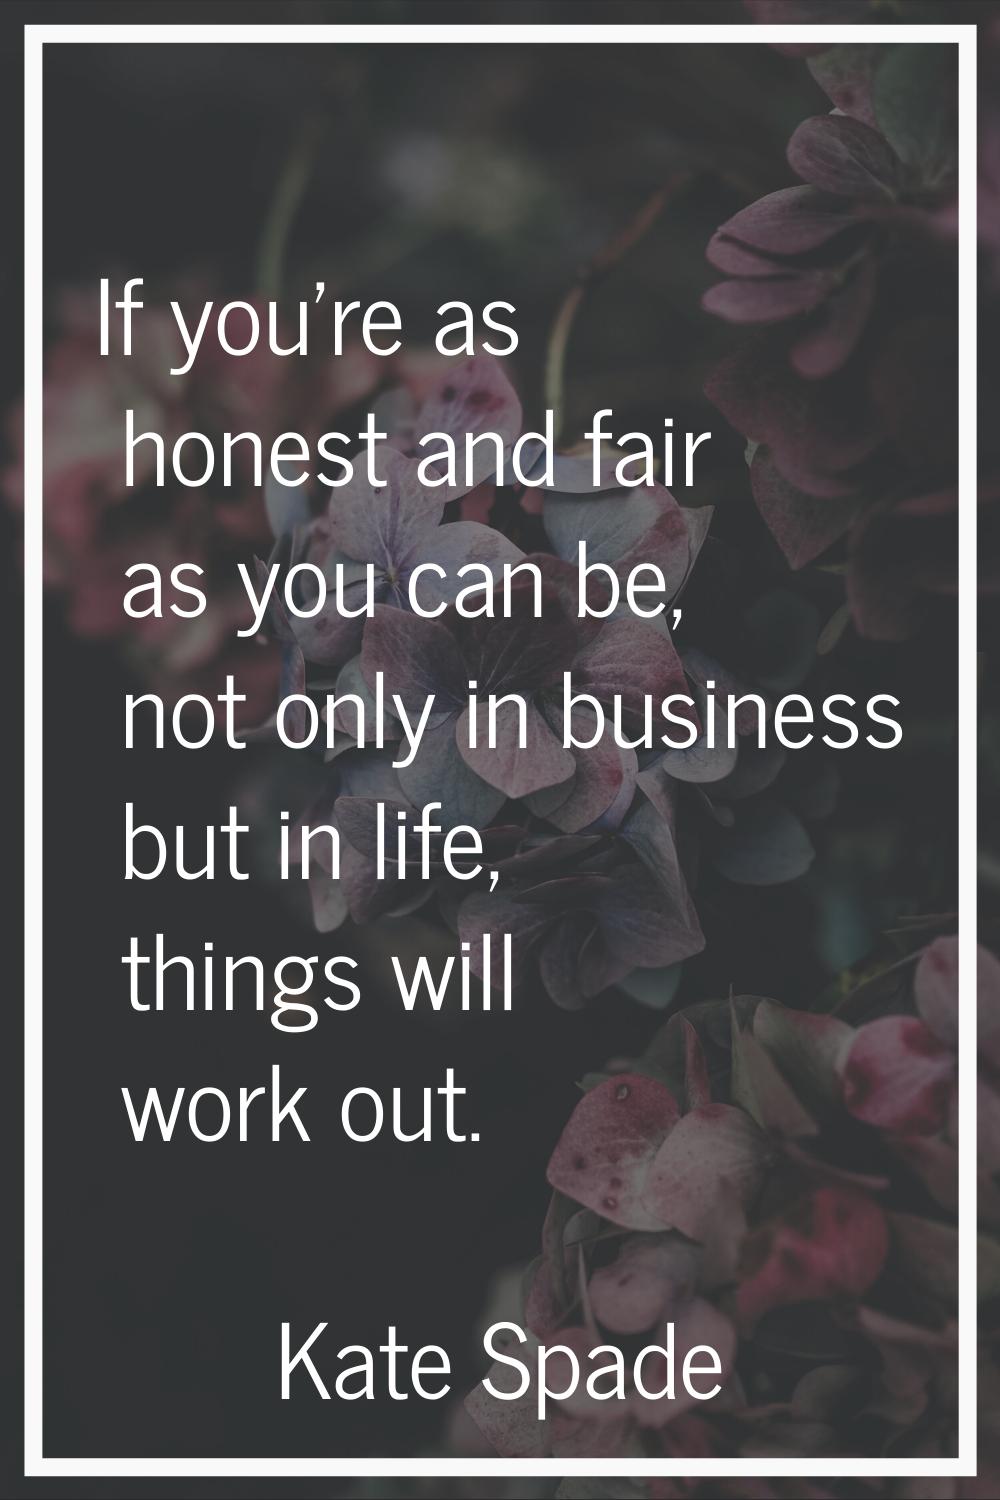 If you're as honest and fair as you can be, not only in business but in life, things will work out.